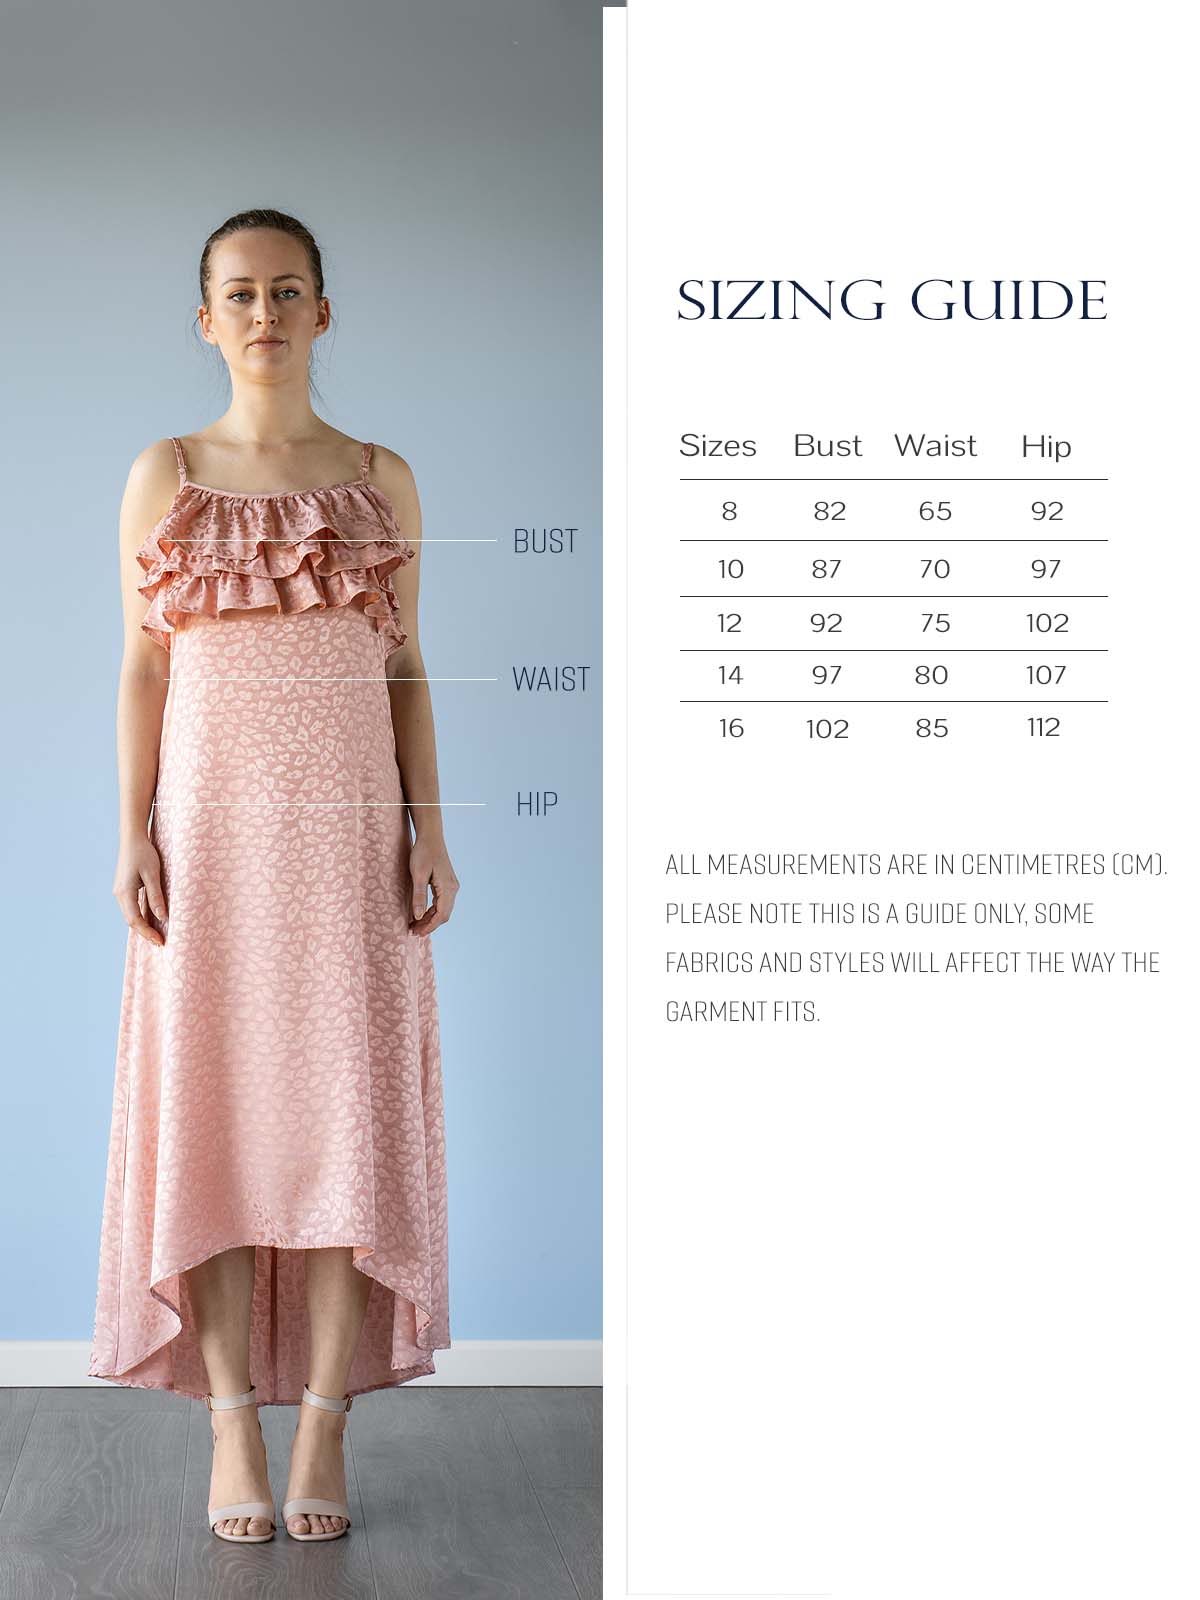 Sizing guide shows how Shebby garments are designed to fit